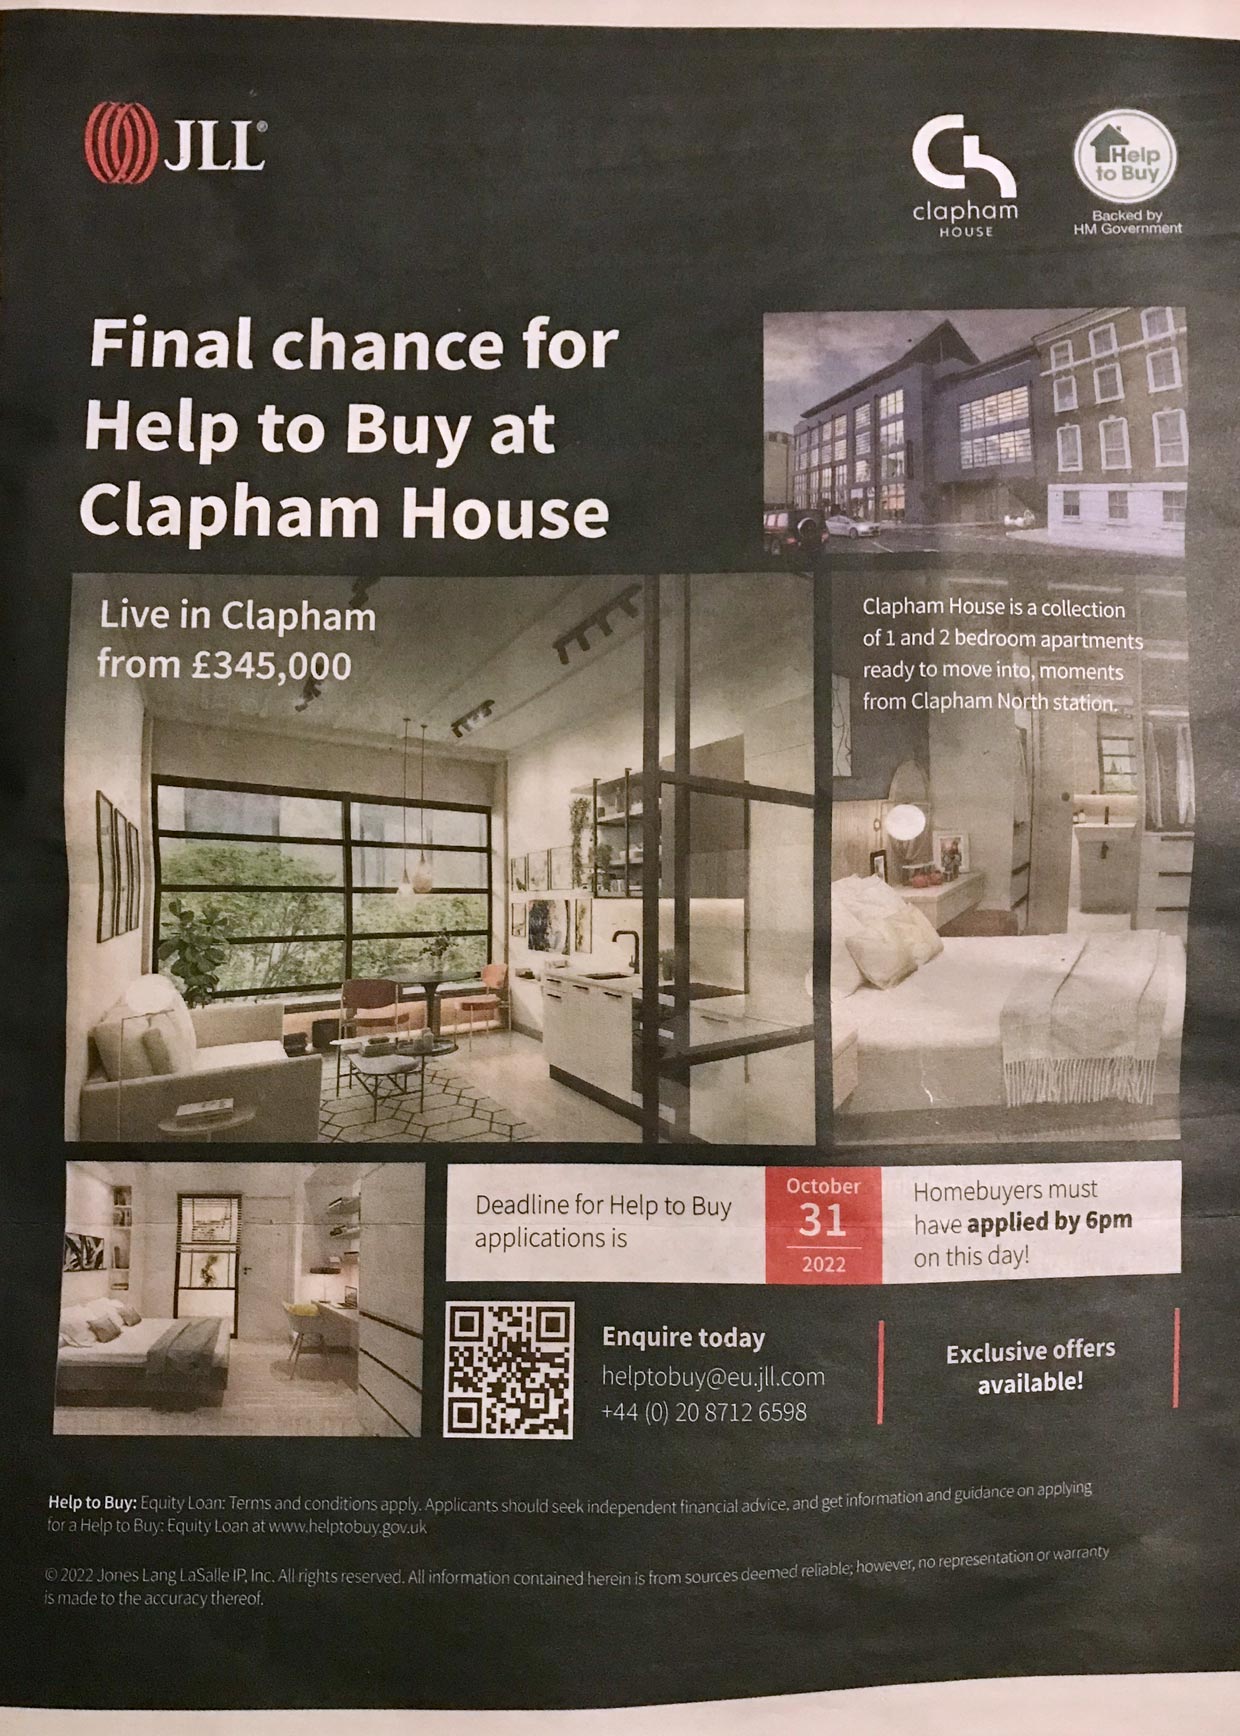 Final chance for Help to Buy at Clapham House